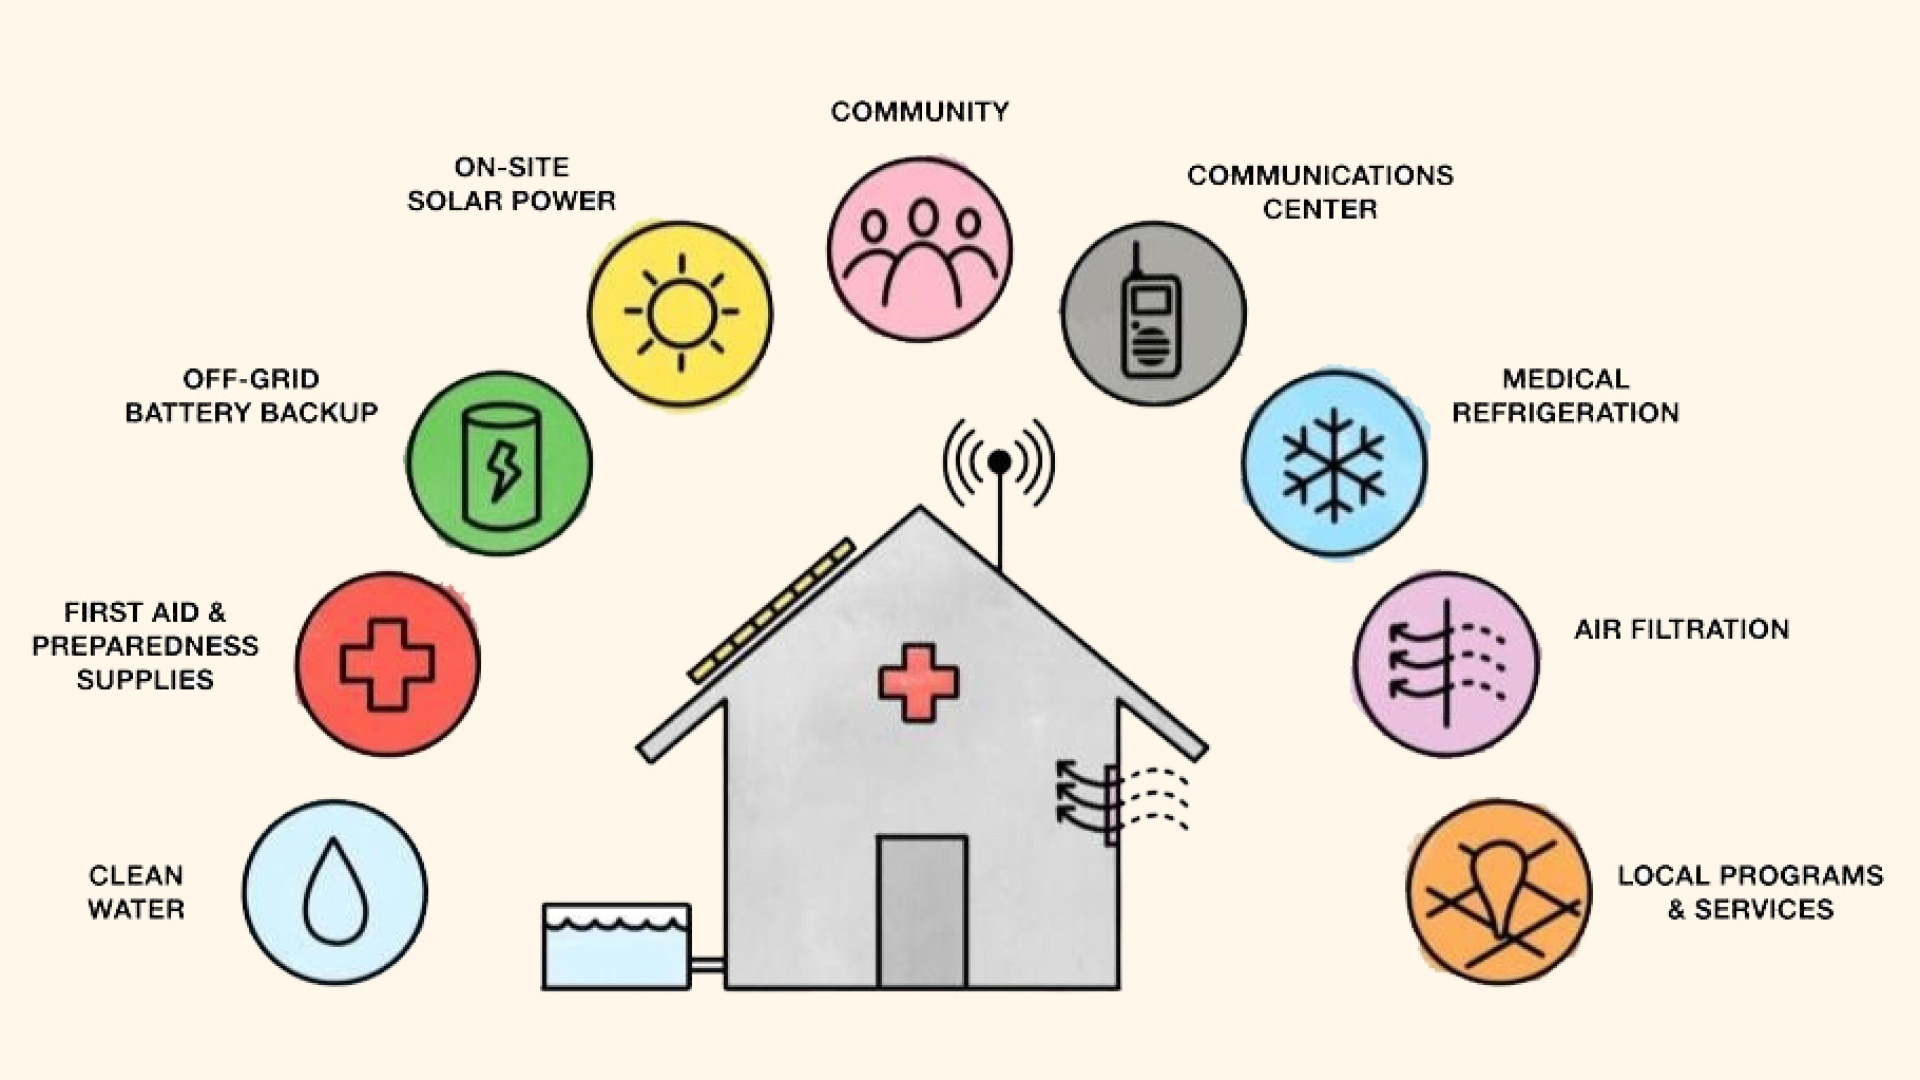 Graphic showing that a resilience hub can have: local programs, air filtration, medical refrigeration, on-site solar power.